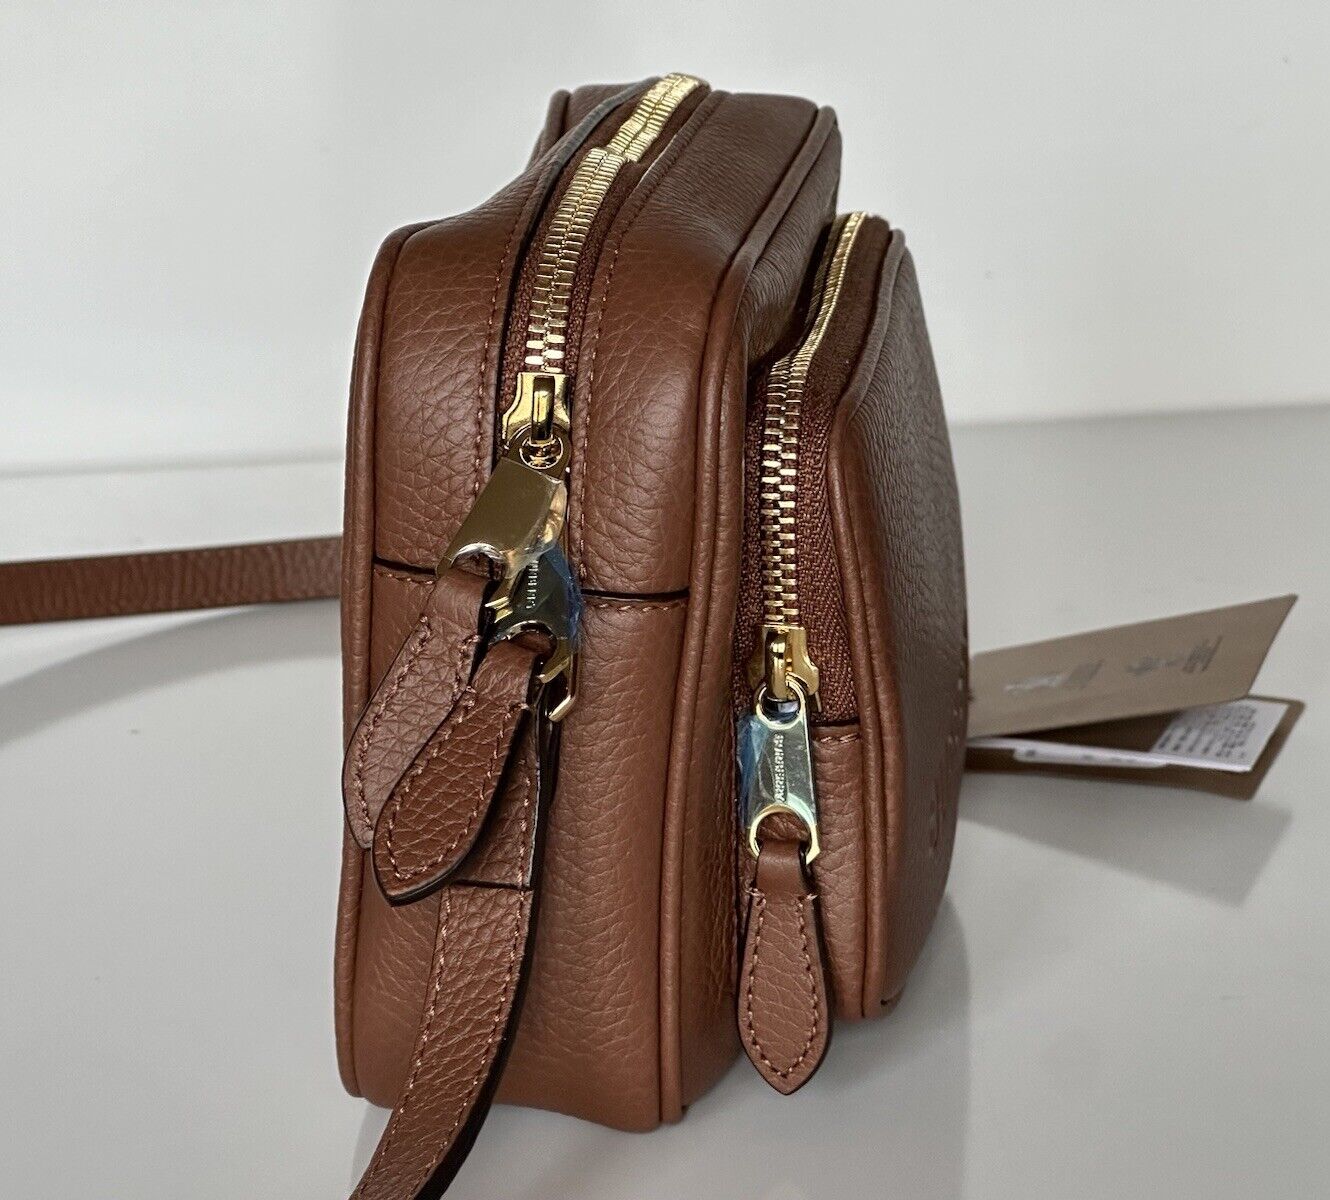 NWT $900 Burberry Small Leather Camera Shoulder Bag Tan Made in Italy 8061571